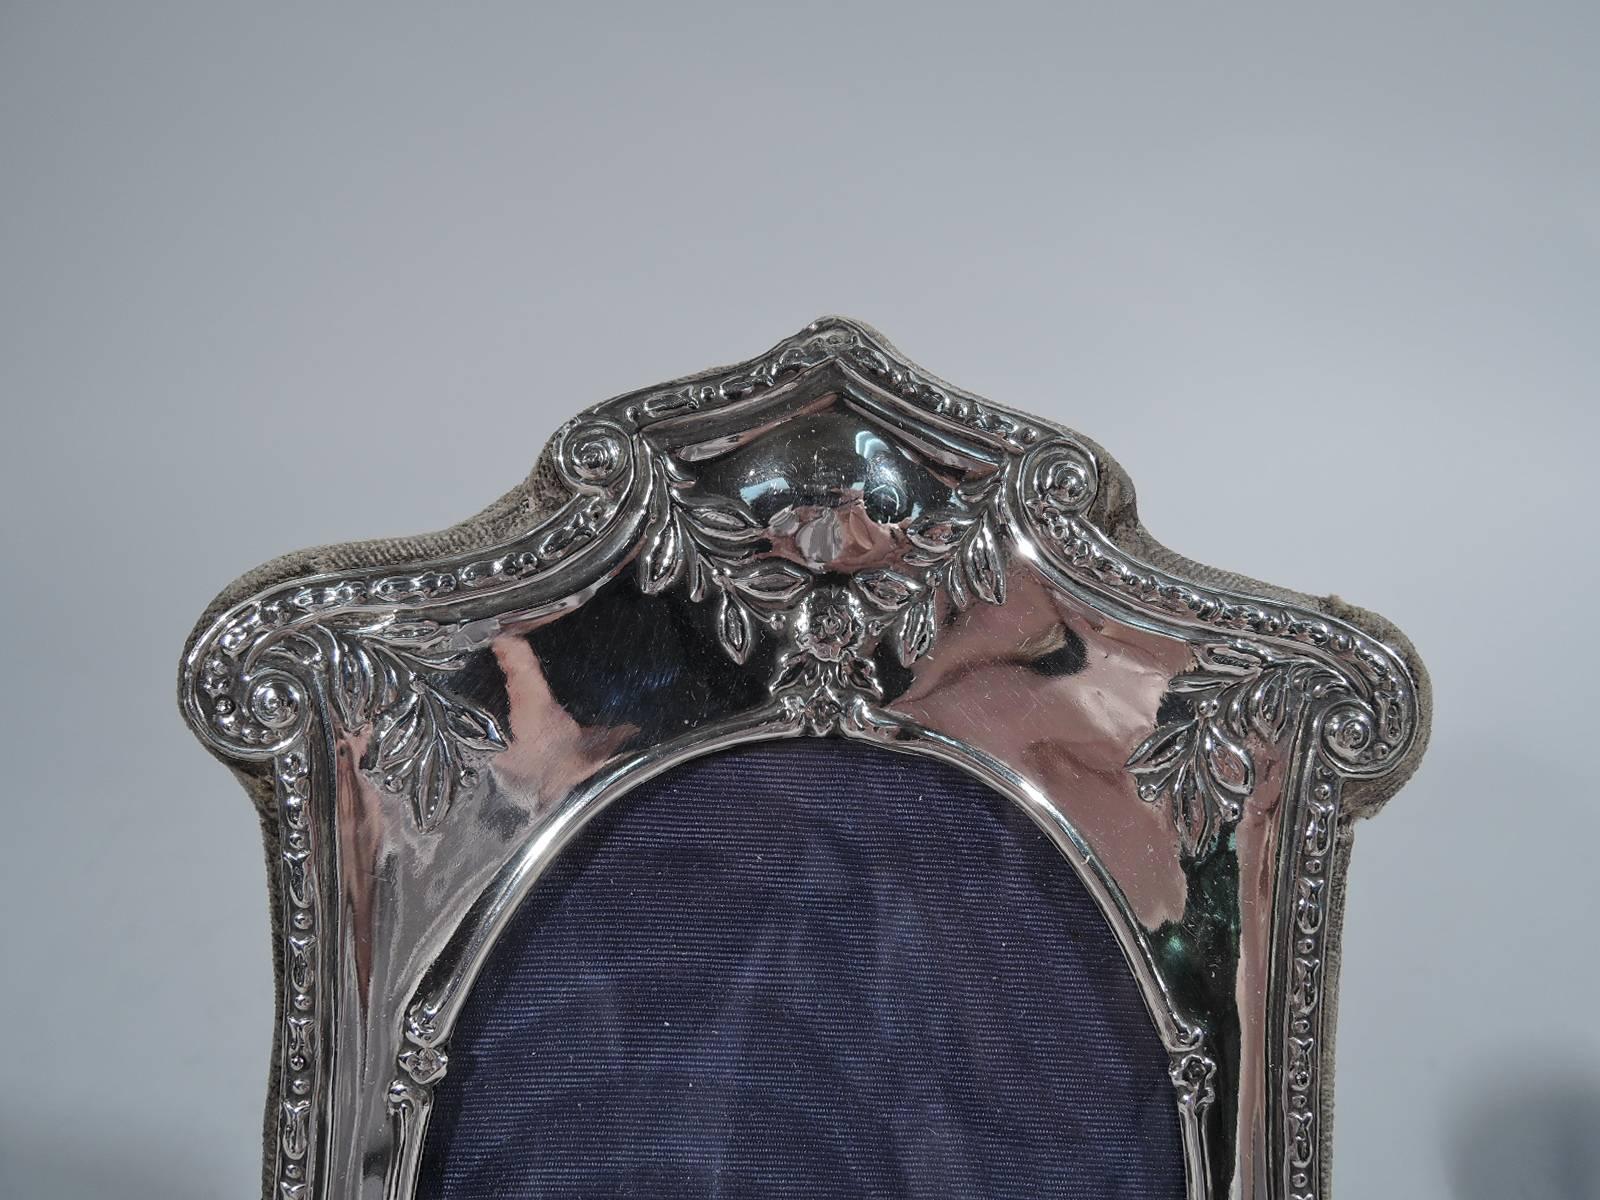 Edwardian Art Nouveau sterling silver picture frame. Made in Birmingham in 1907. Oval window with floral and foliate ornament. Shaped top and bracket feet with volute scrolls. Frame mounted to velvet back with hinged support. With glass and silk